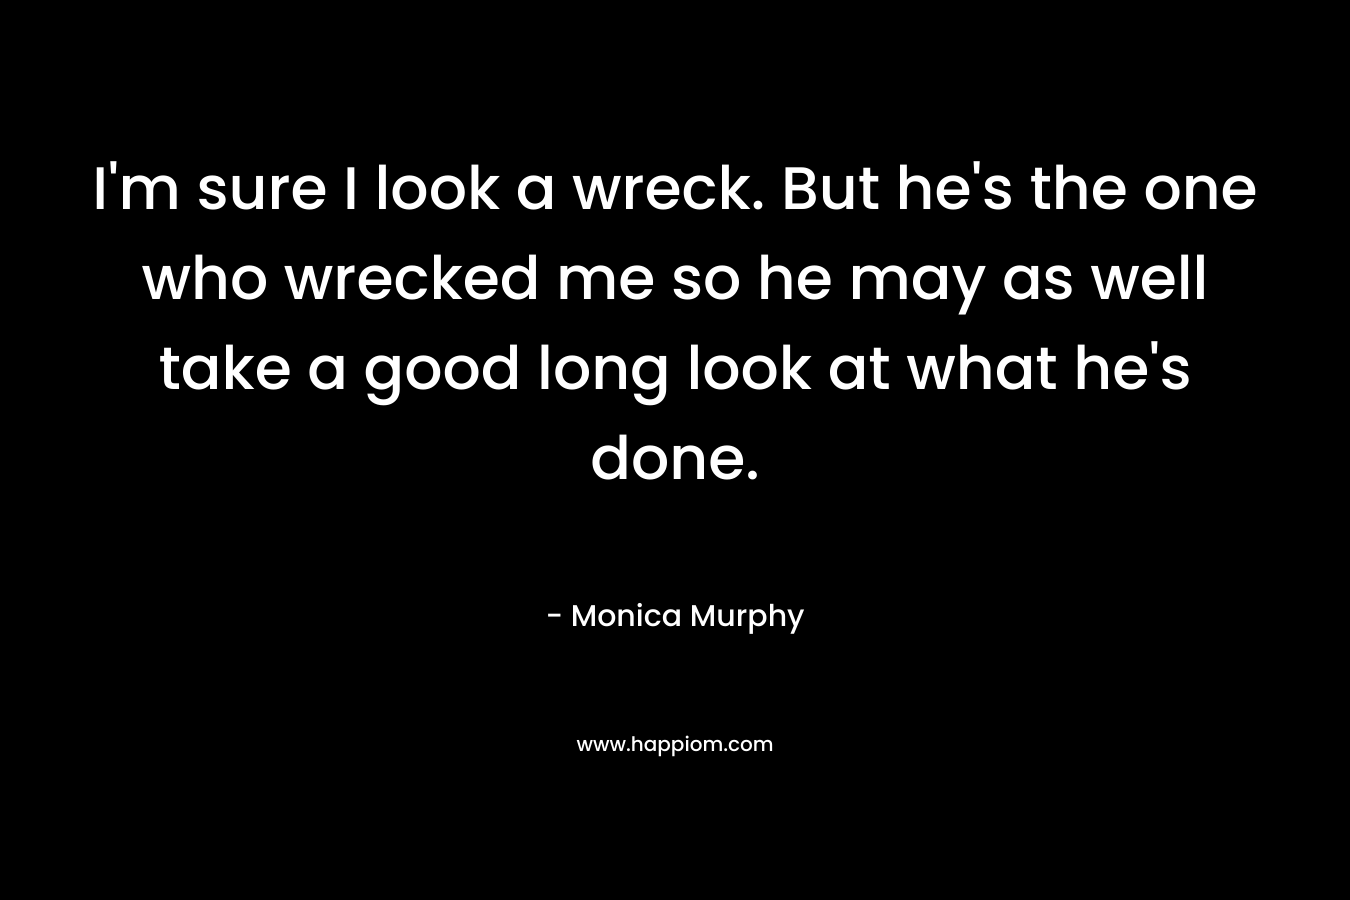 I’m sure I look a wreck. But he’s the one who wrecked me so he may as well take a good long look at what he’s done. – Monica  Murphy